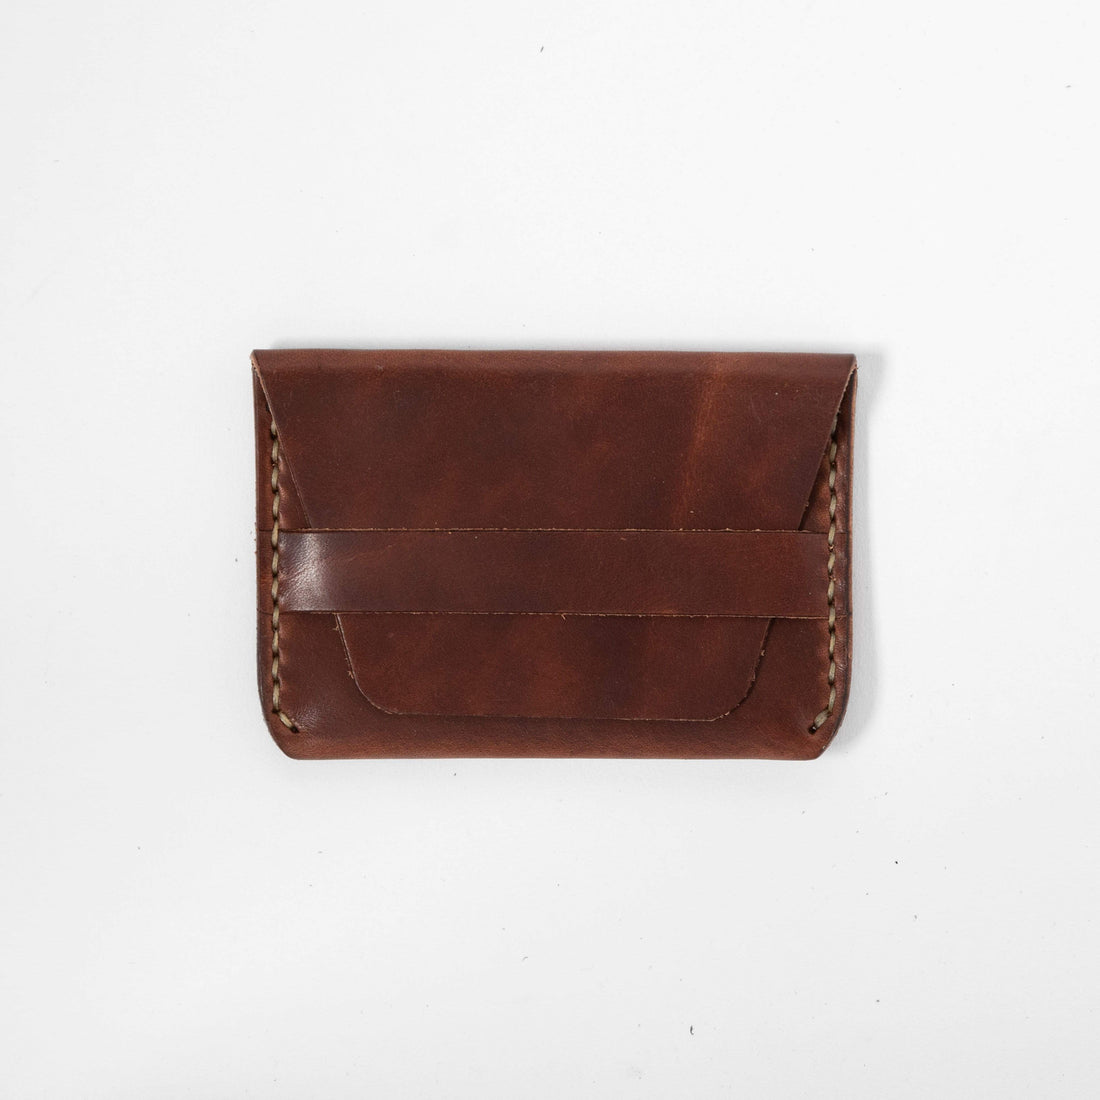 Medium Brown Flap Wallet- mens leather wallet - handmade leather wallets at KMM &amp; Co.